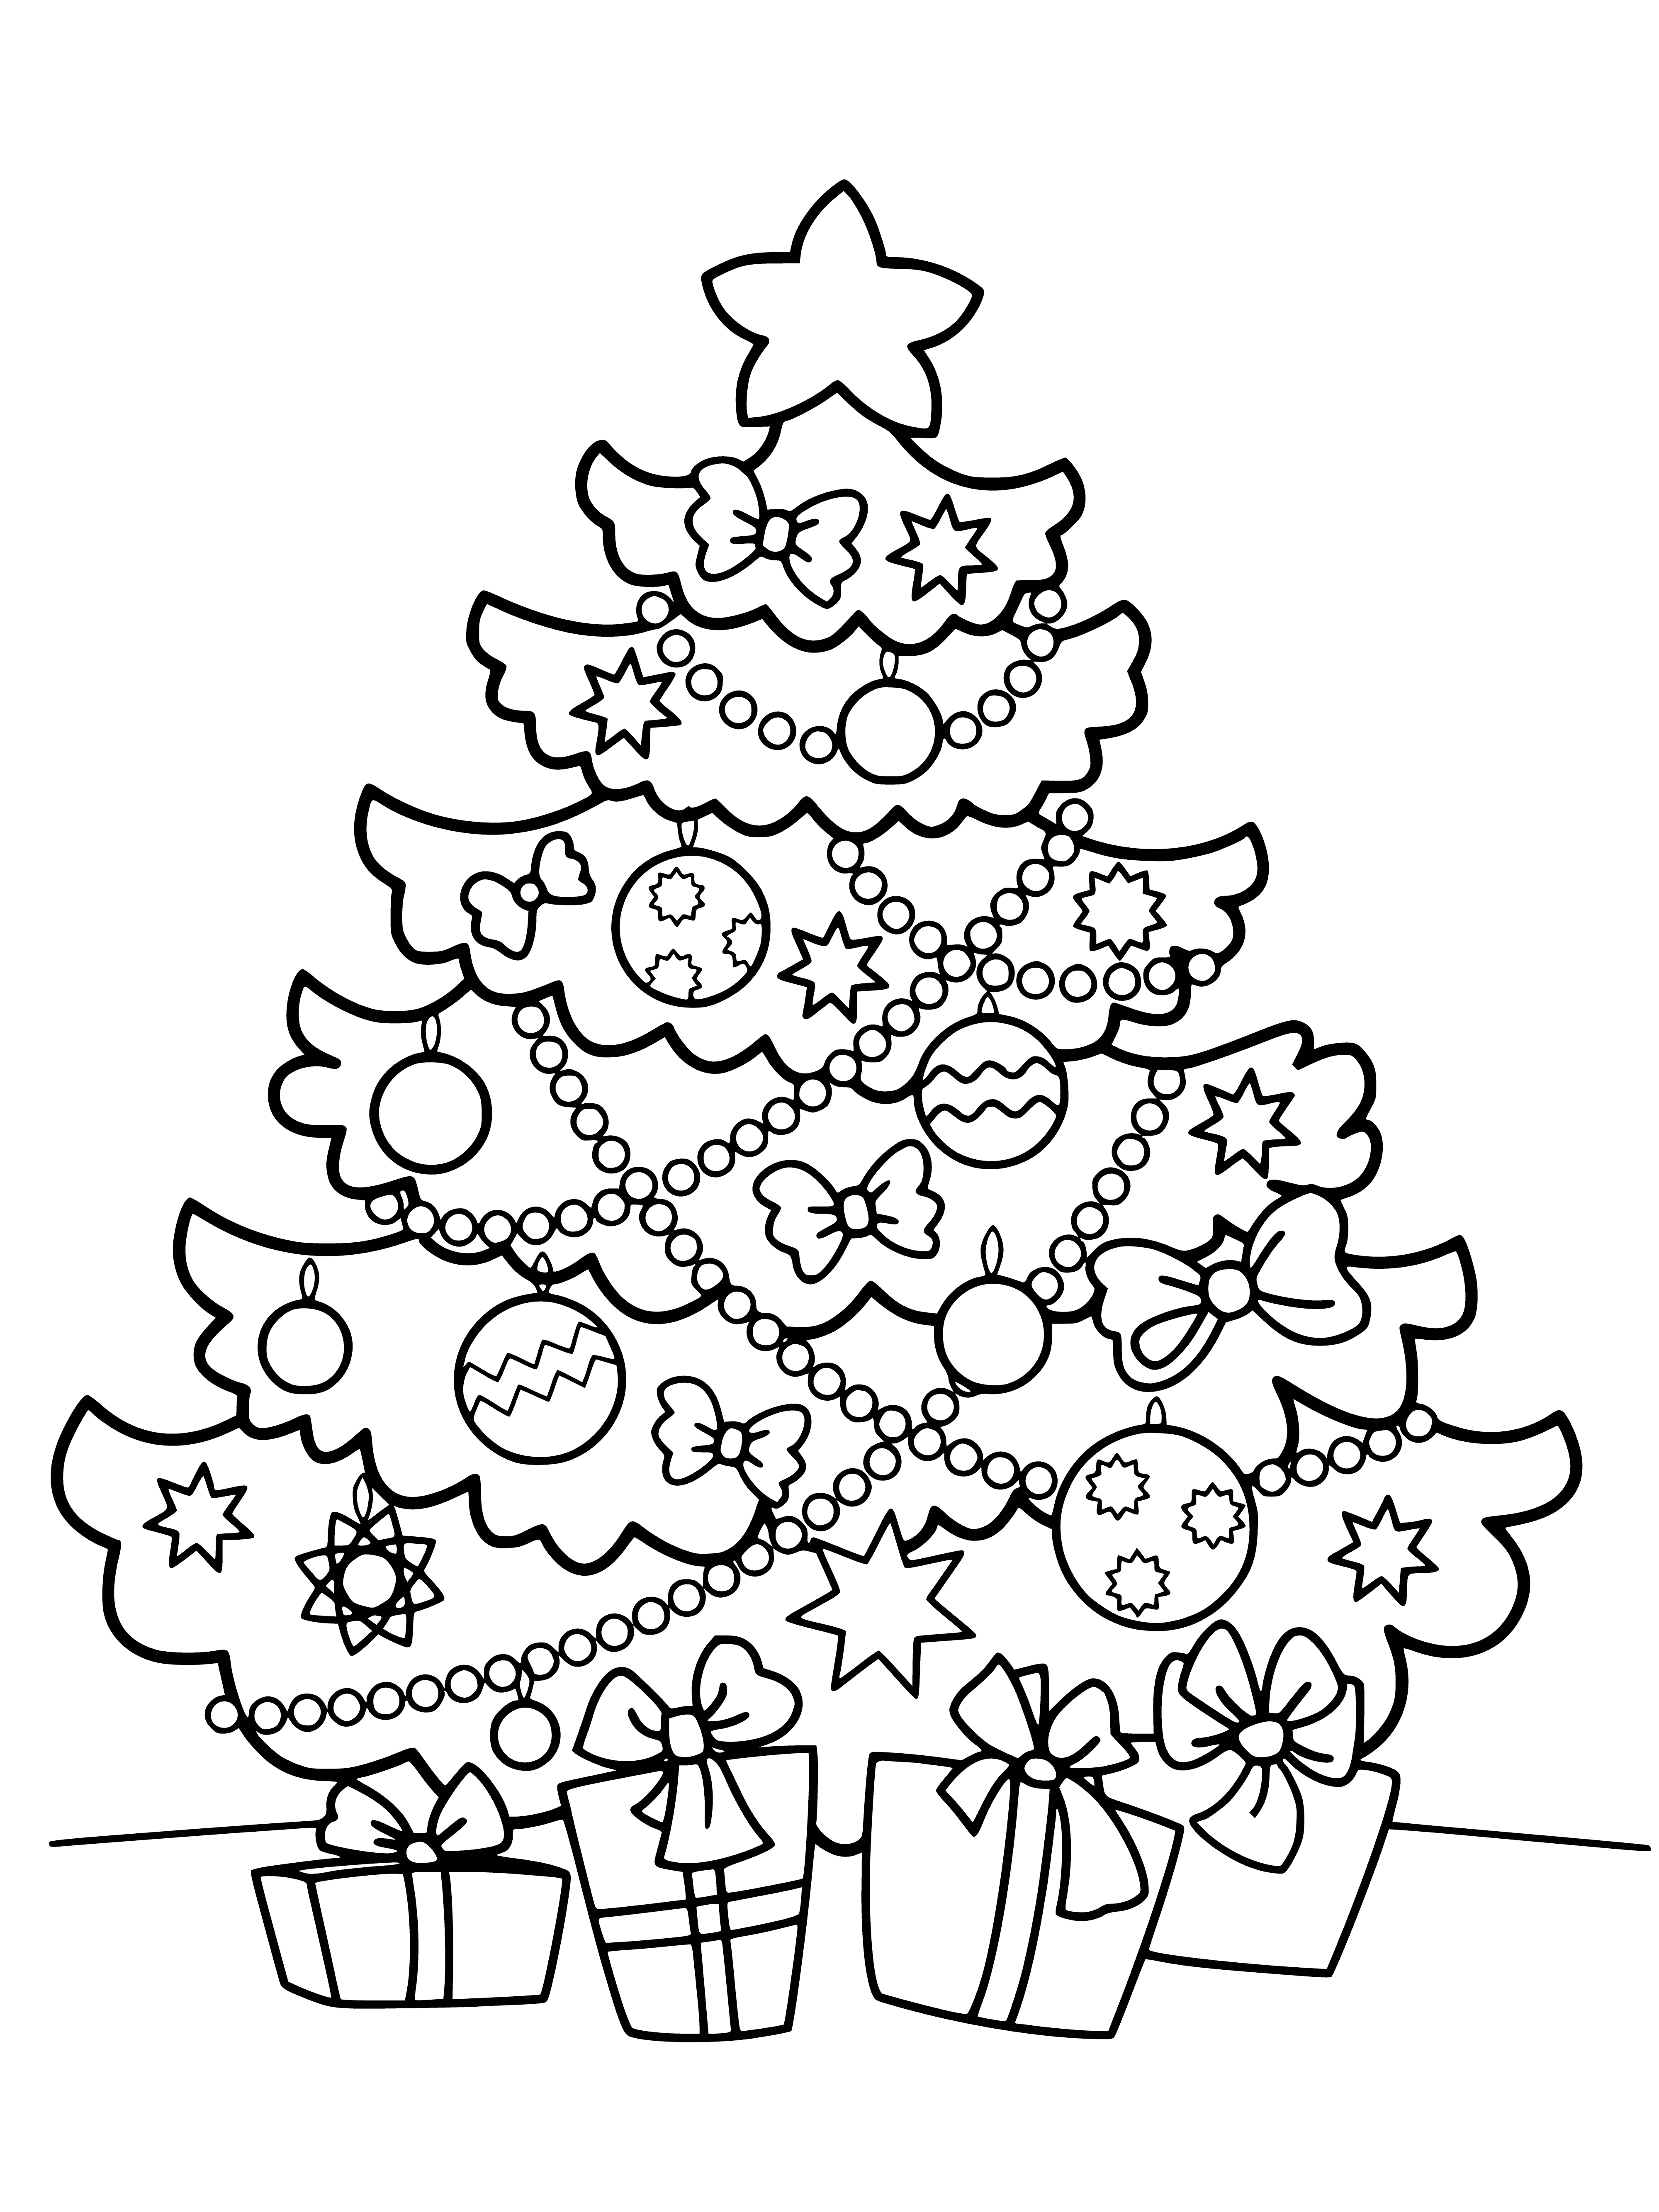 coloring page: Beautiful Christmas trees of different colors and sizes with presents under them to color! #ChristmasTree #ColoringPages